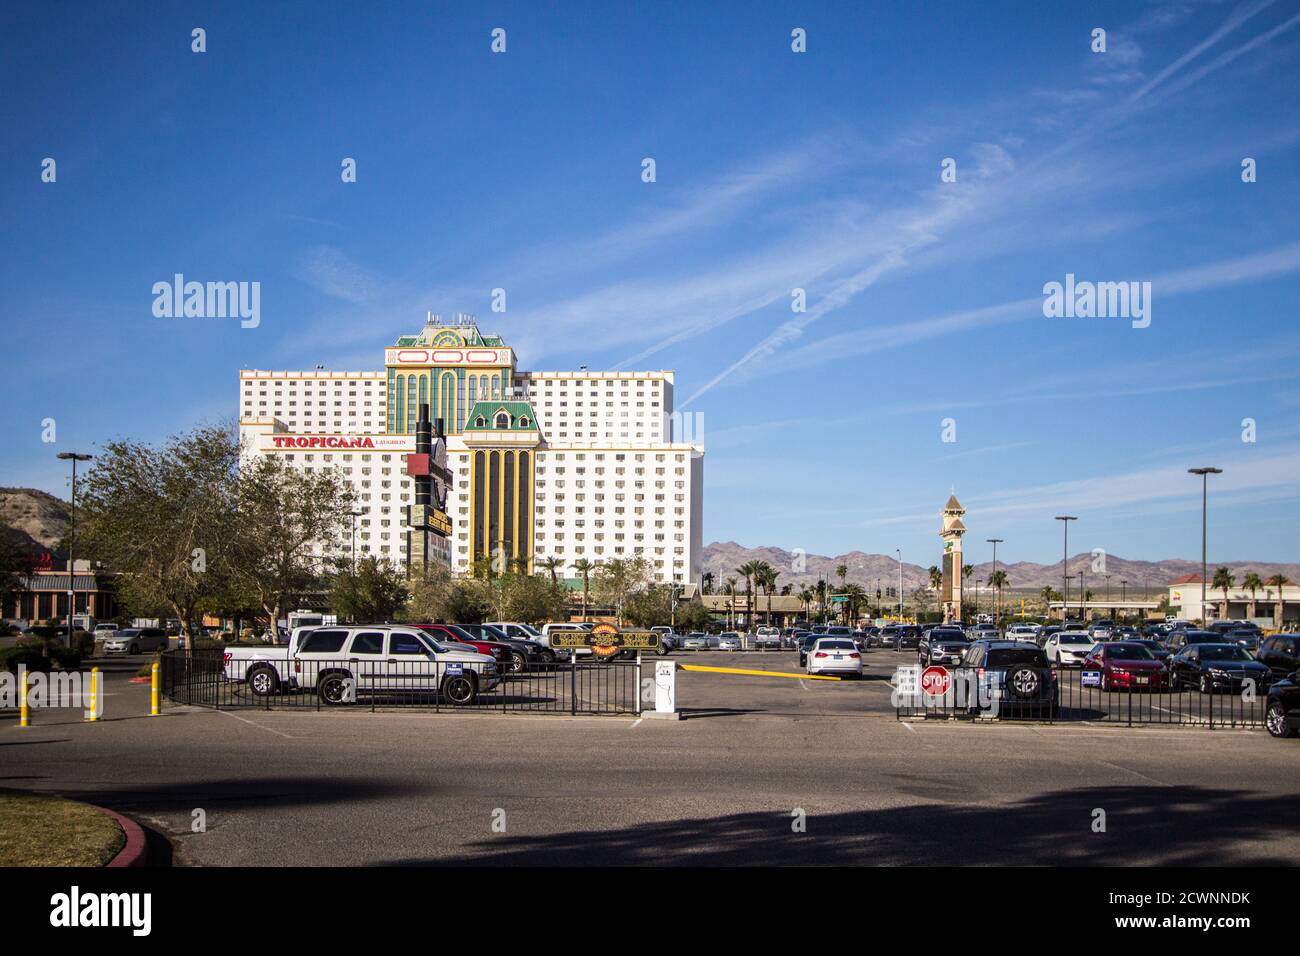 Laughlin, Nevada, USA - February 17, 2020: Traffic on the Laughlin Strip with the Tropicana Resort in the background. Stock Photo